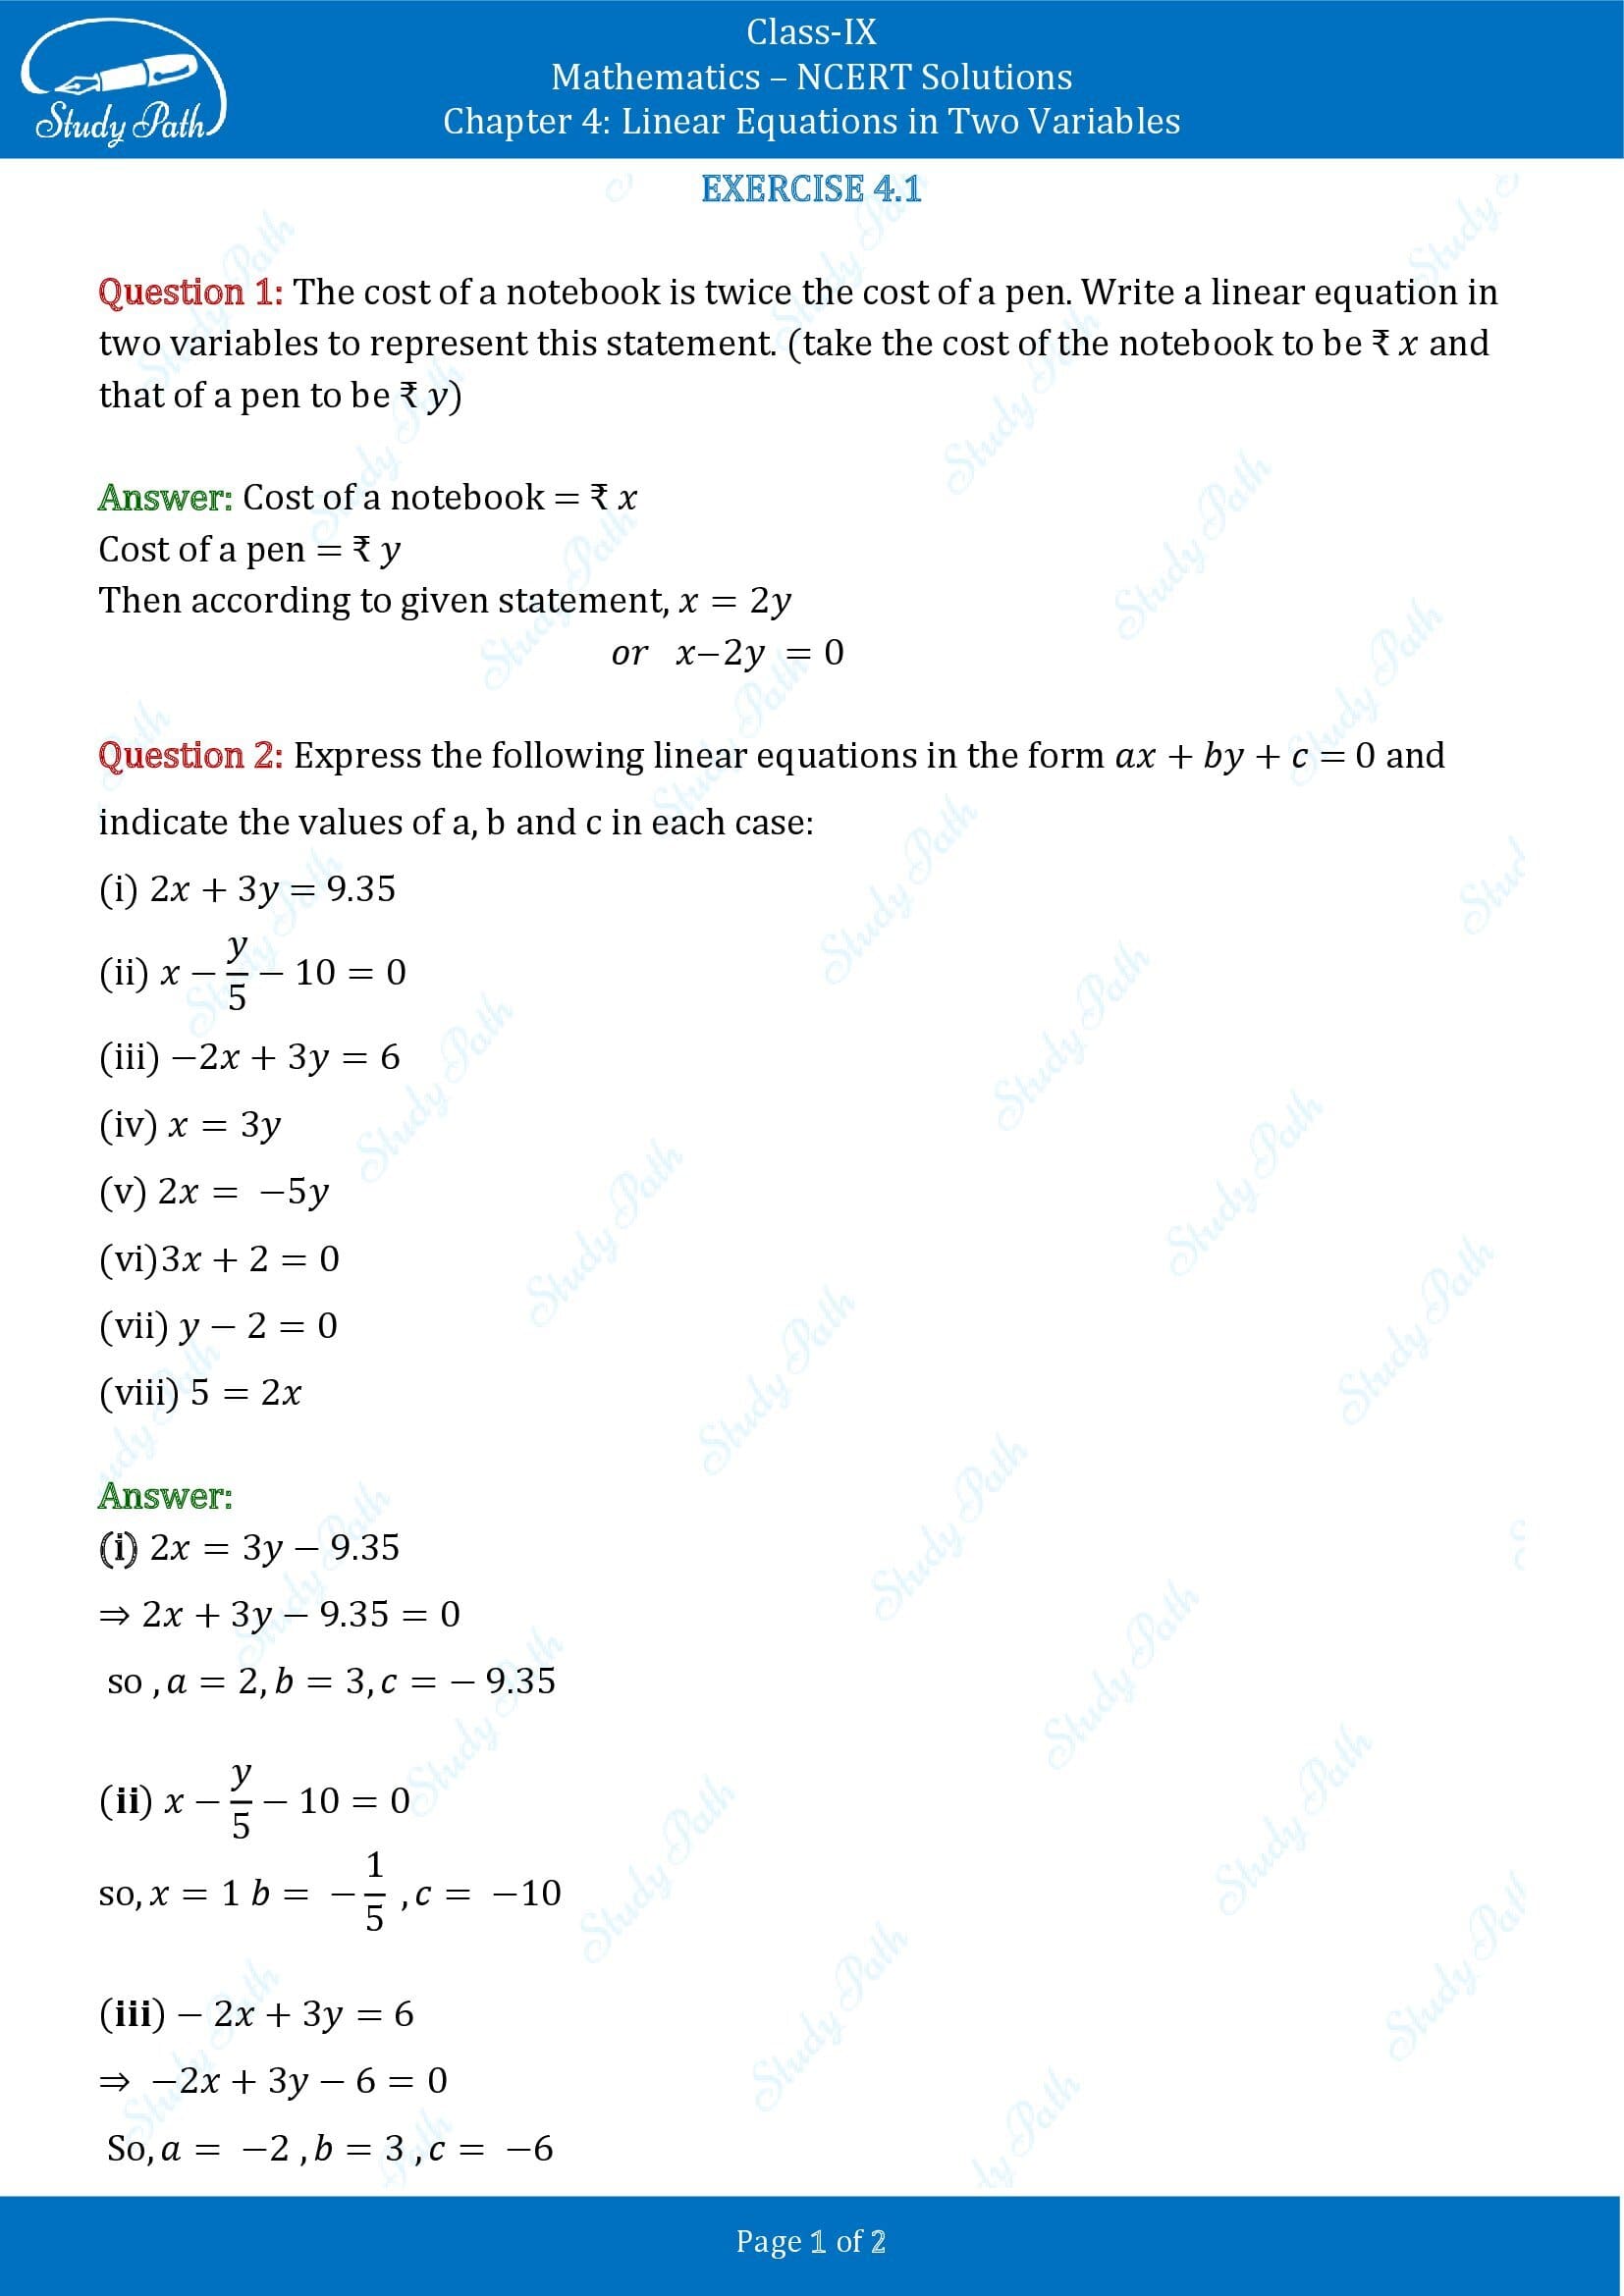 NCERT Solutions for Class 9 Maths Chapter 4 Linear Equations in Two Variables Exercise 4.1 0001